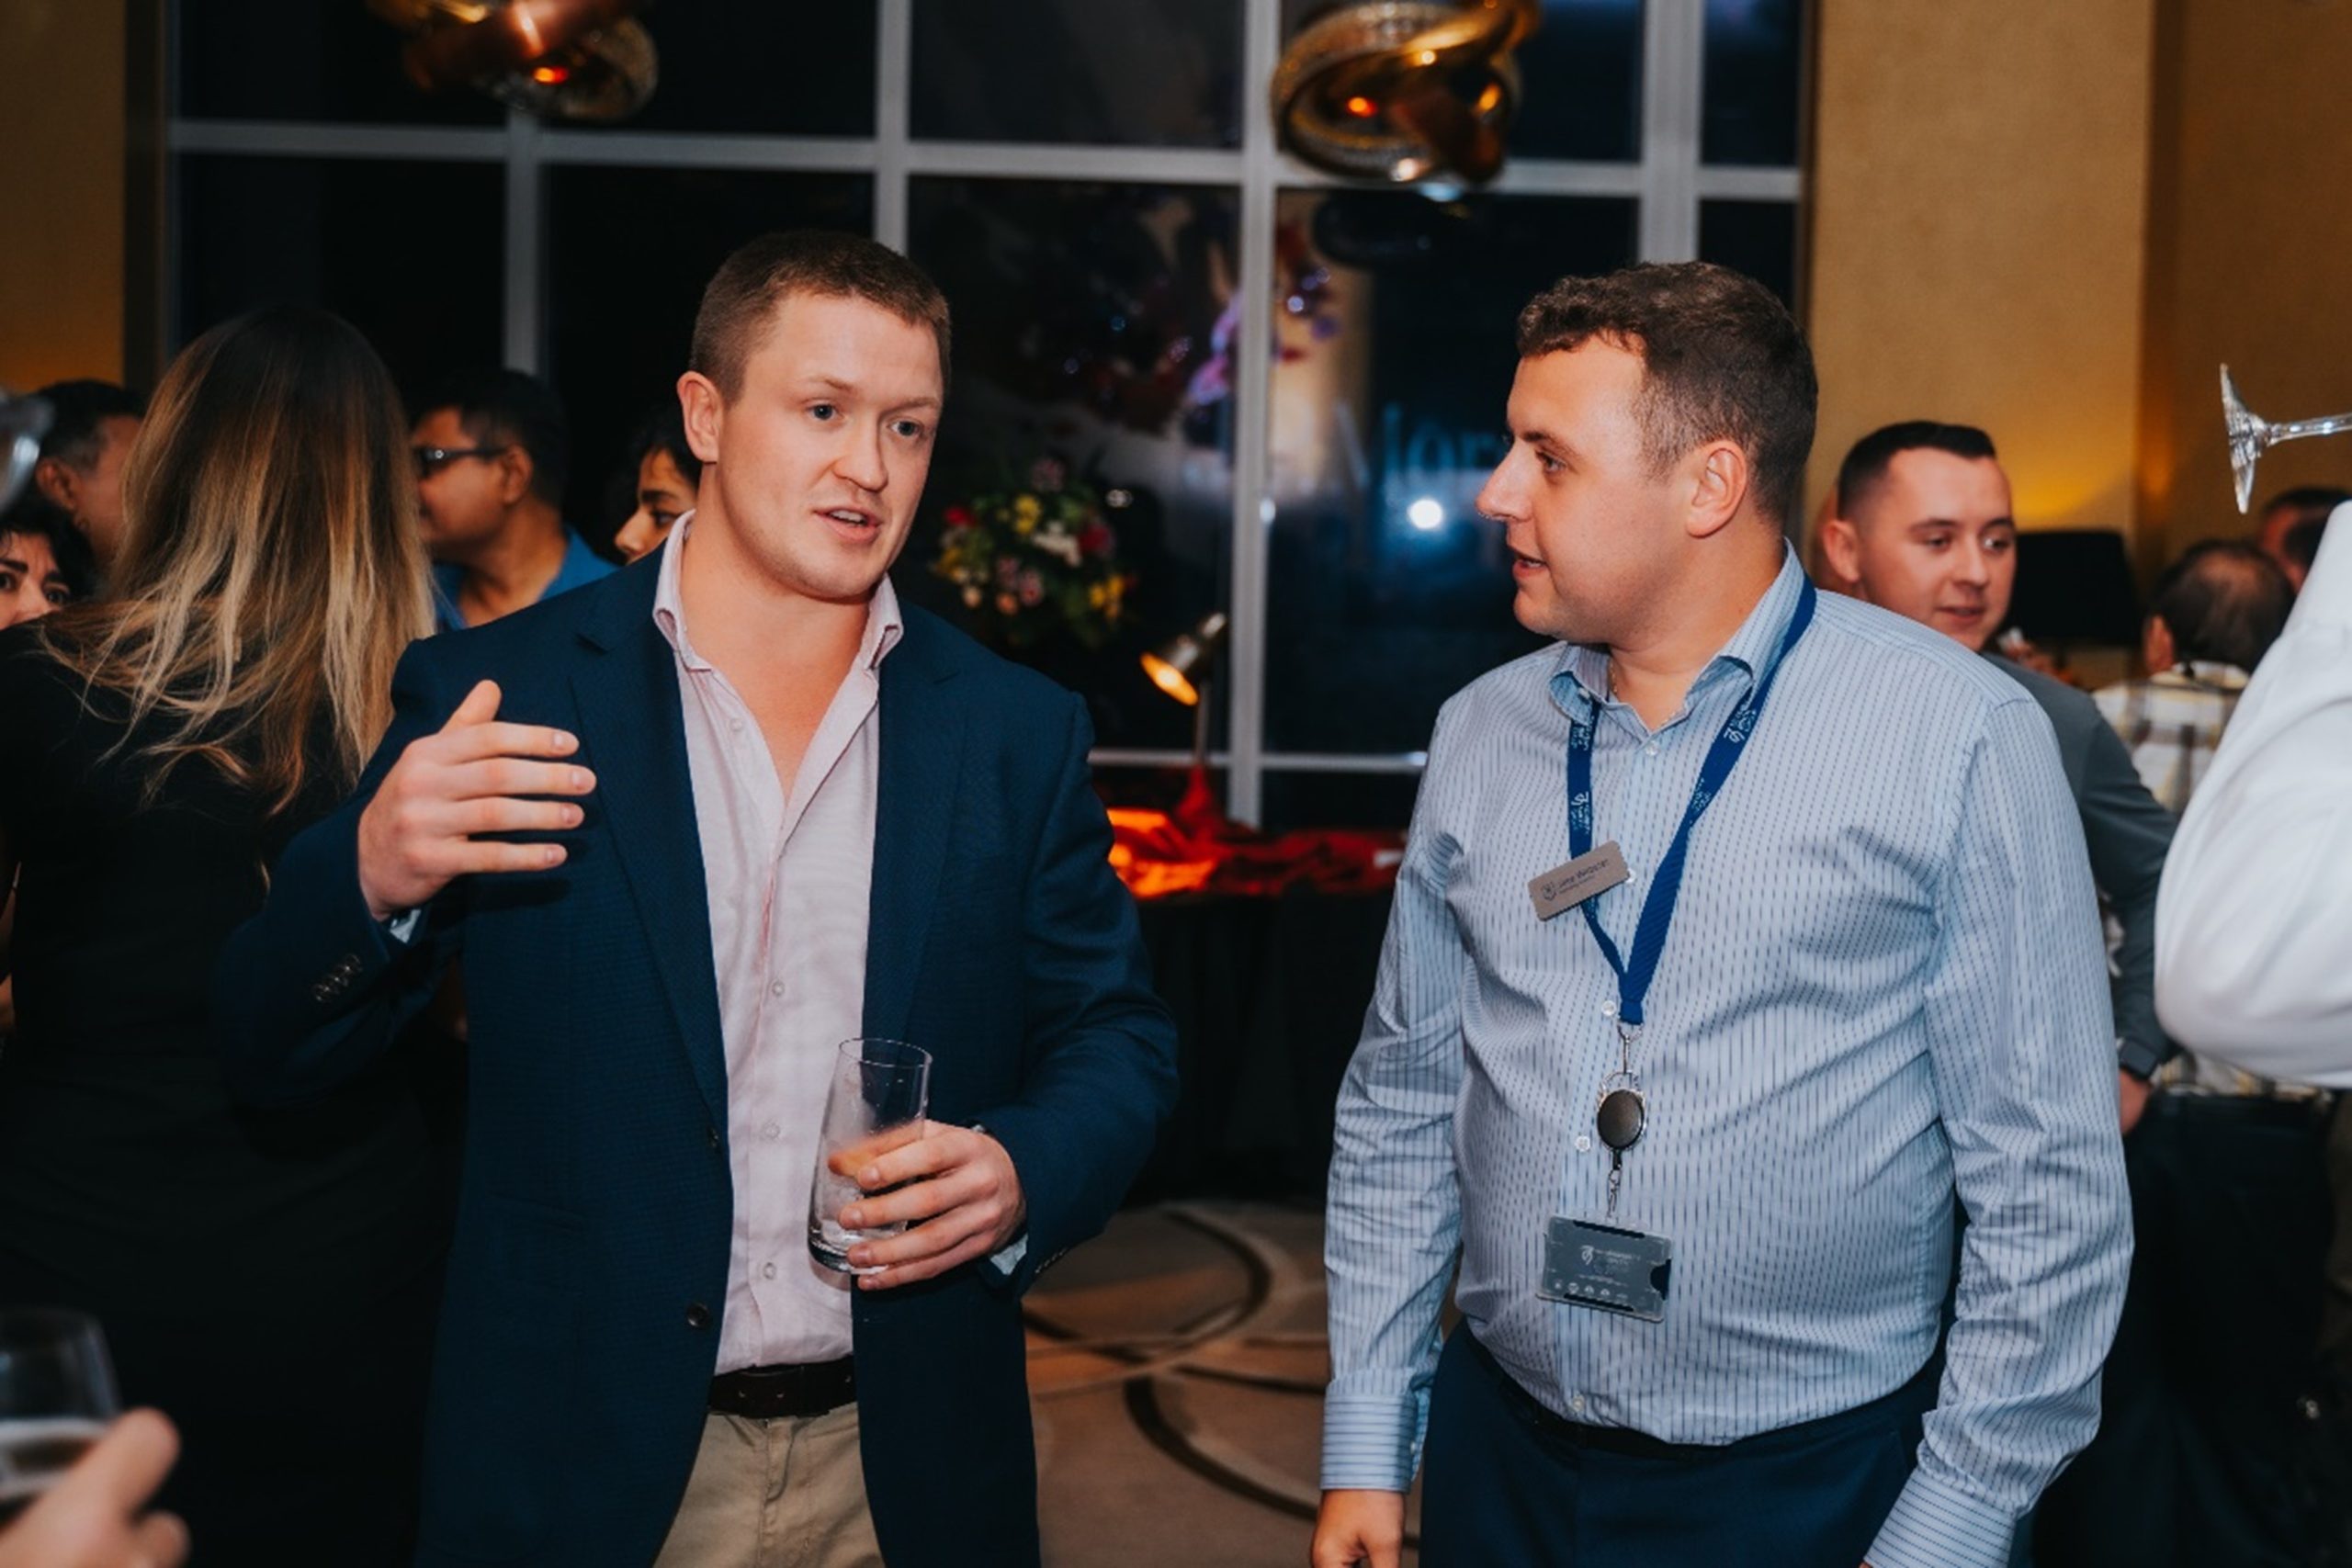 A picture of two genetlement at a corporate event